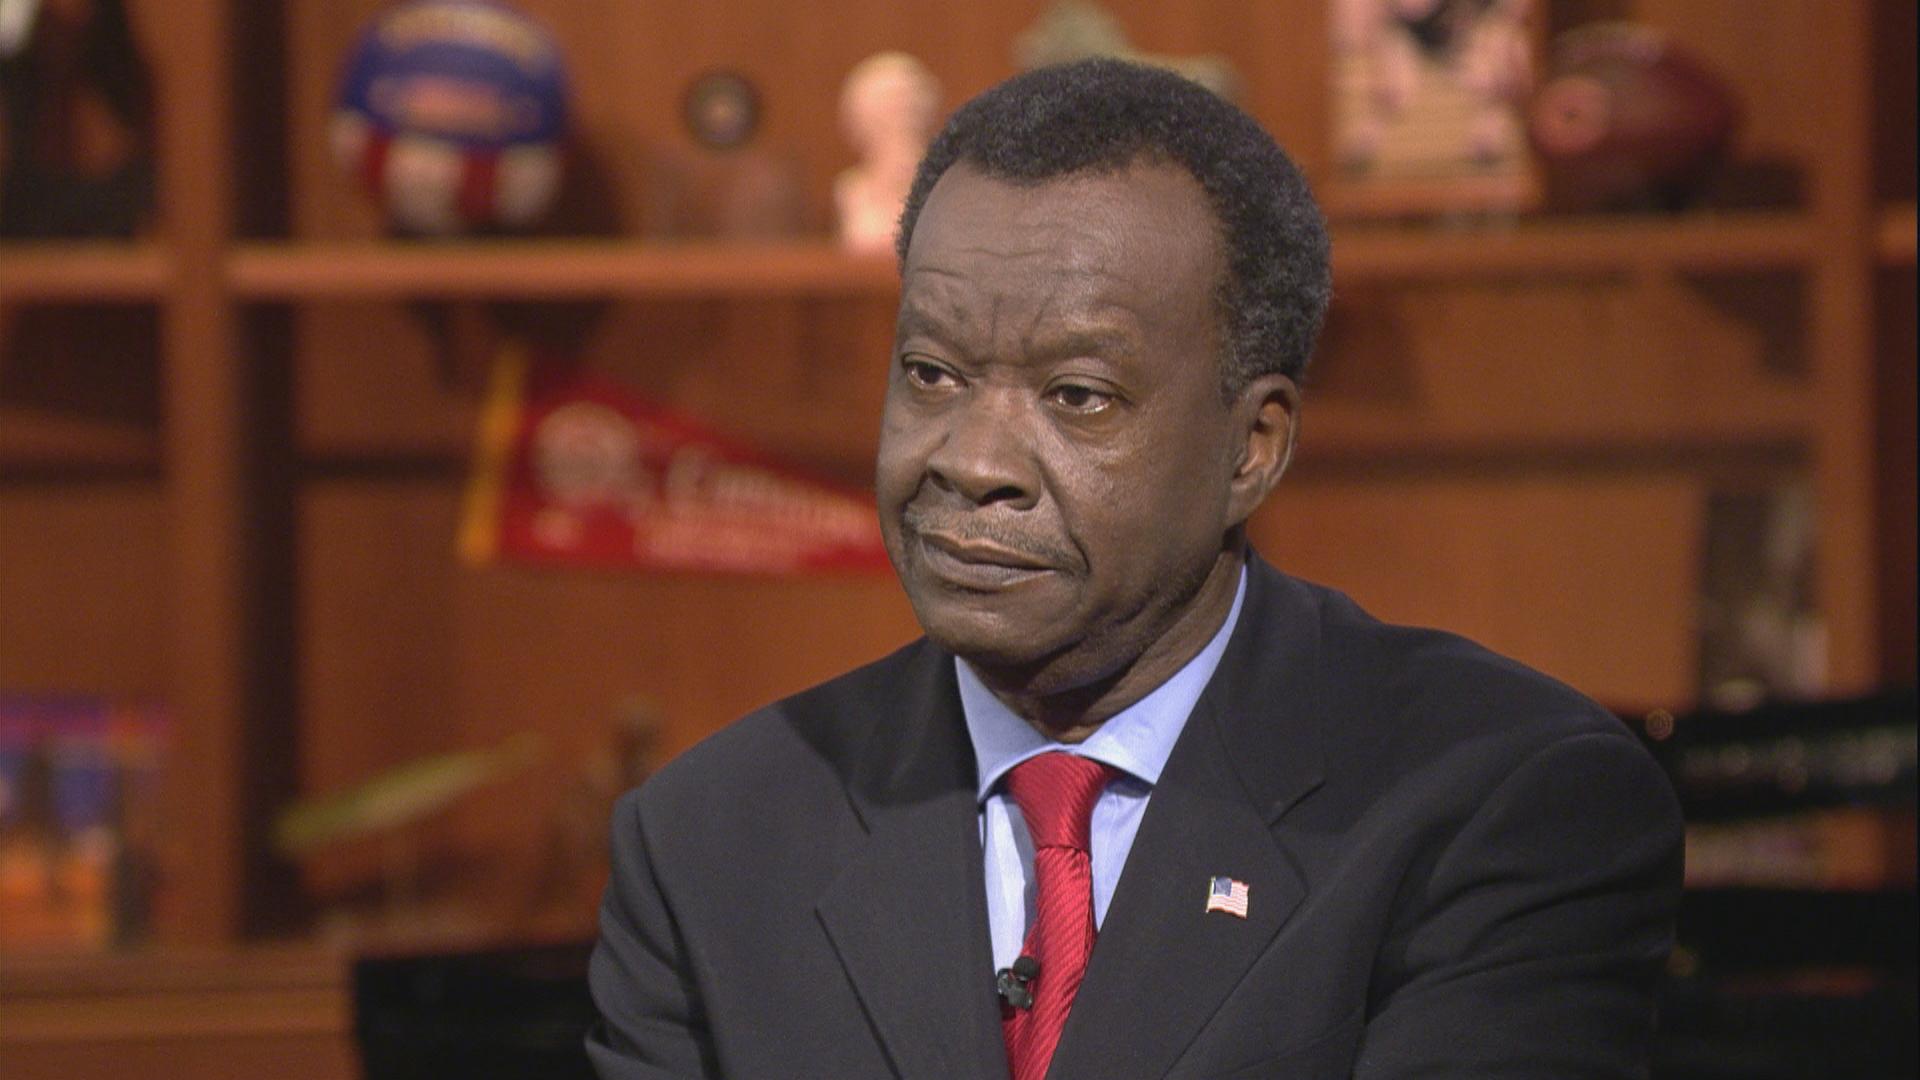 Willie Wilson appears on “Chicago Tonight” on March 28, 2018.